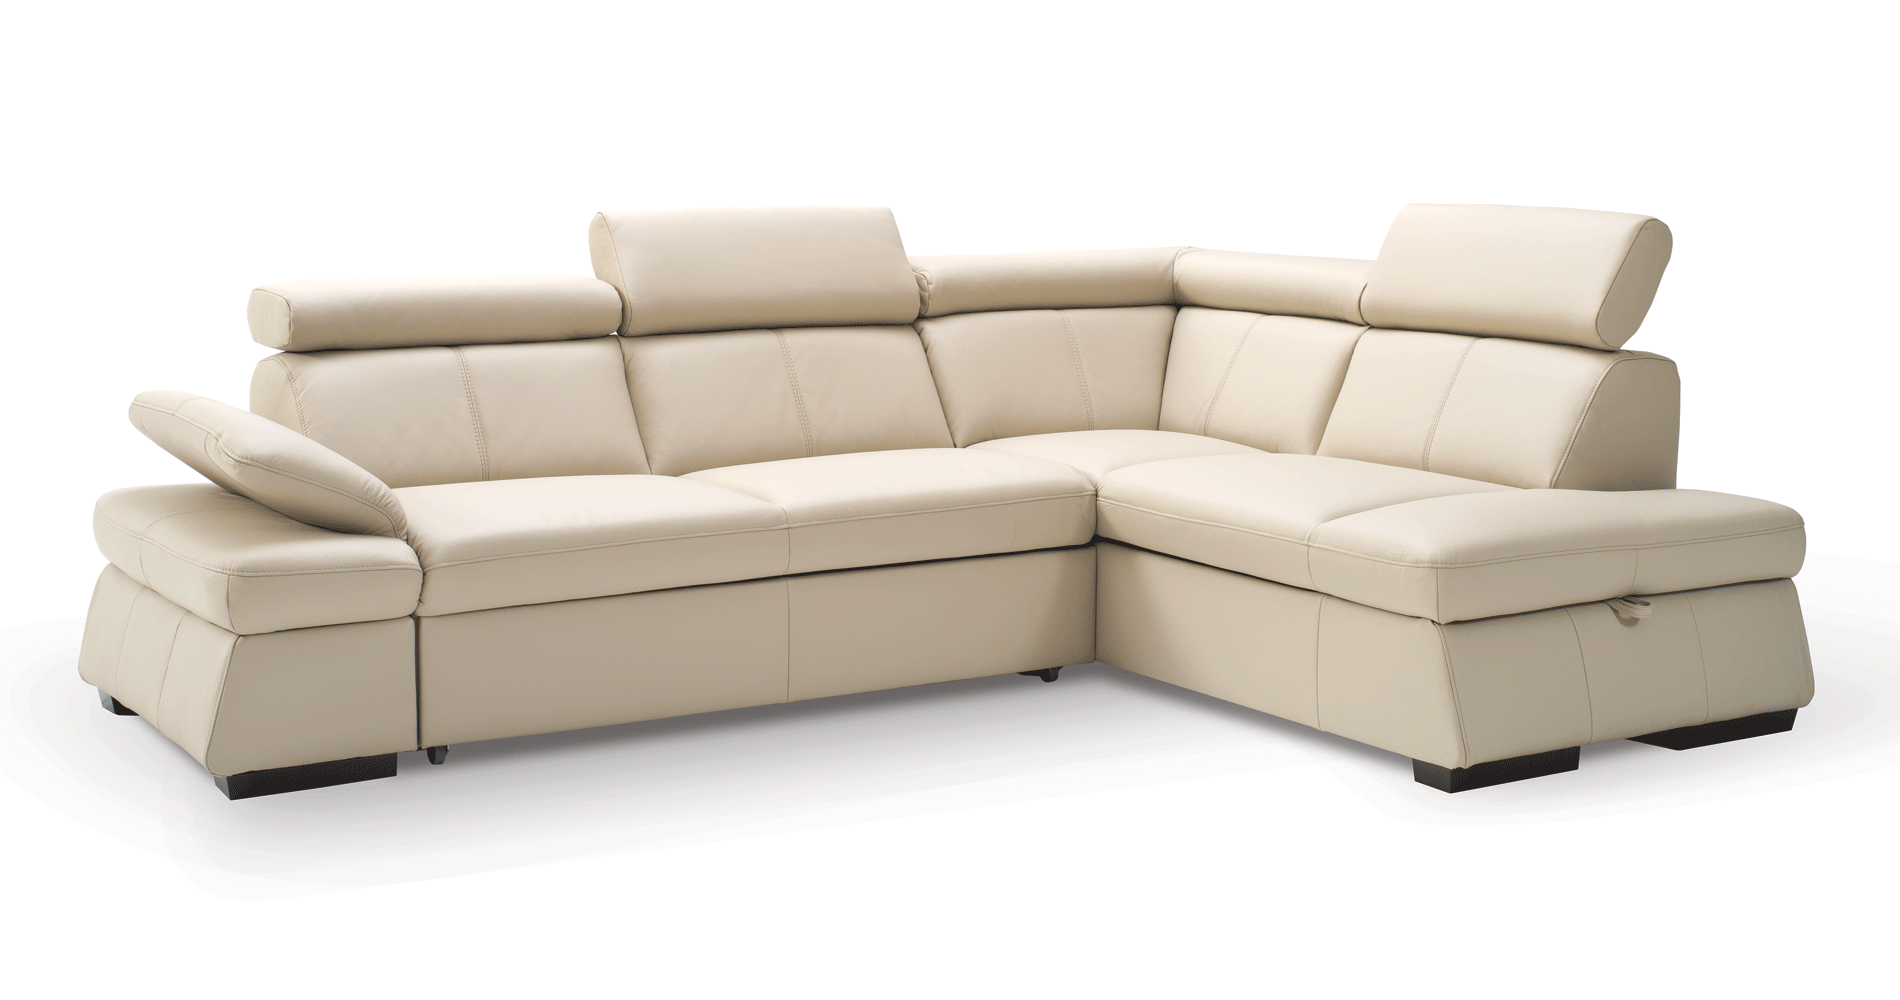 Brands Status Modern Collections, Italy Malpensa Sectional w/ Bed & storage